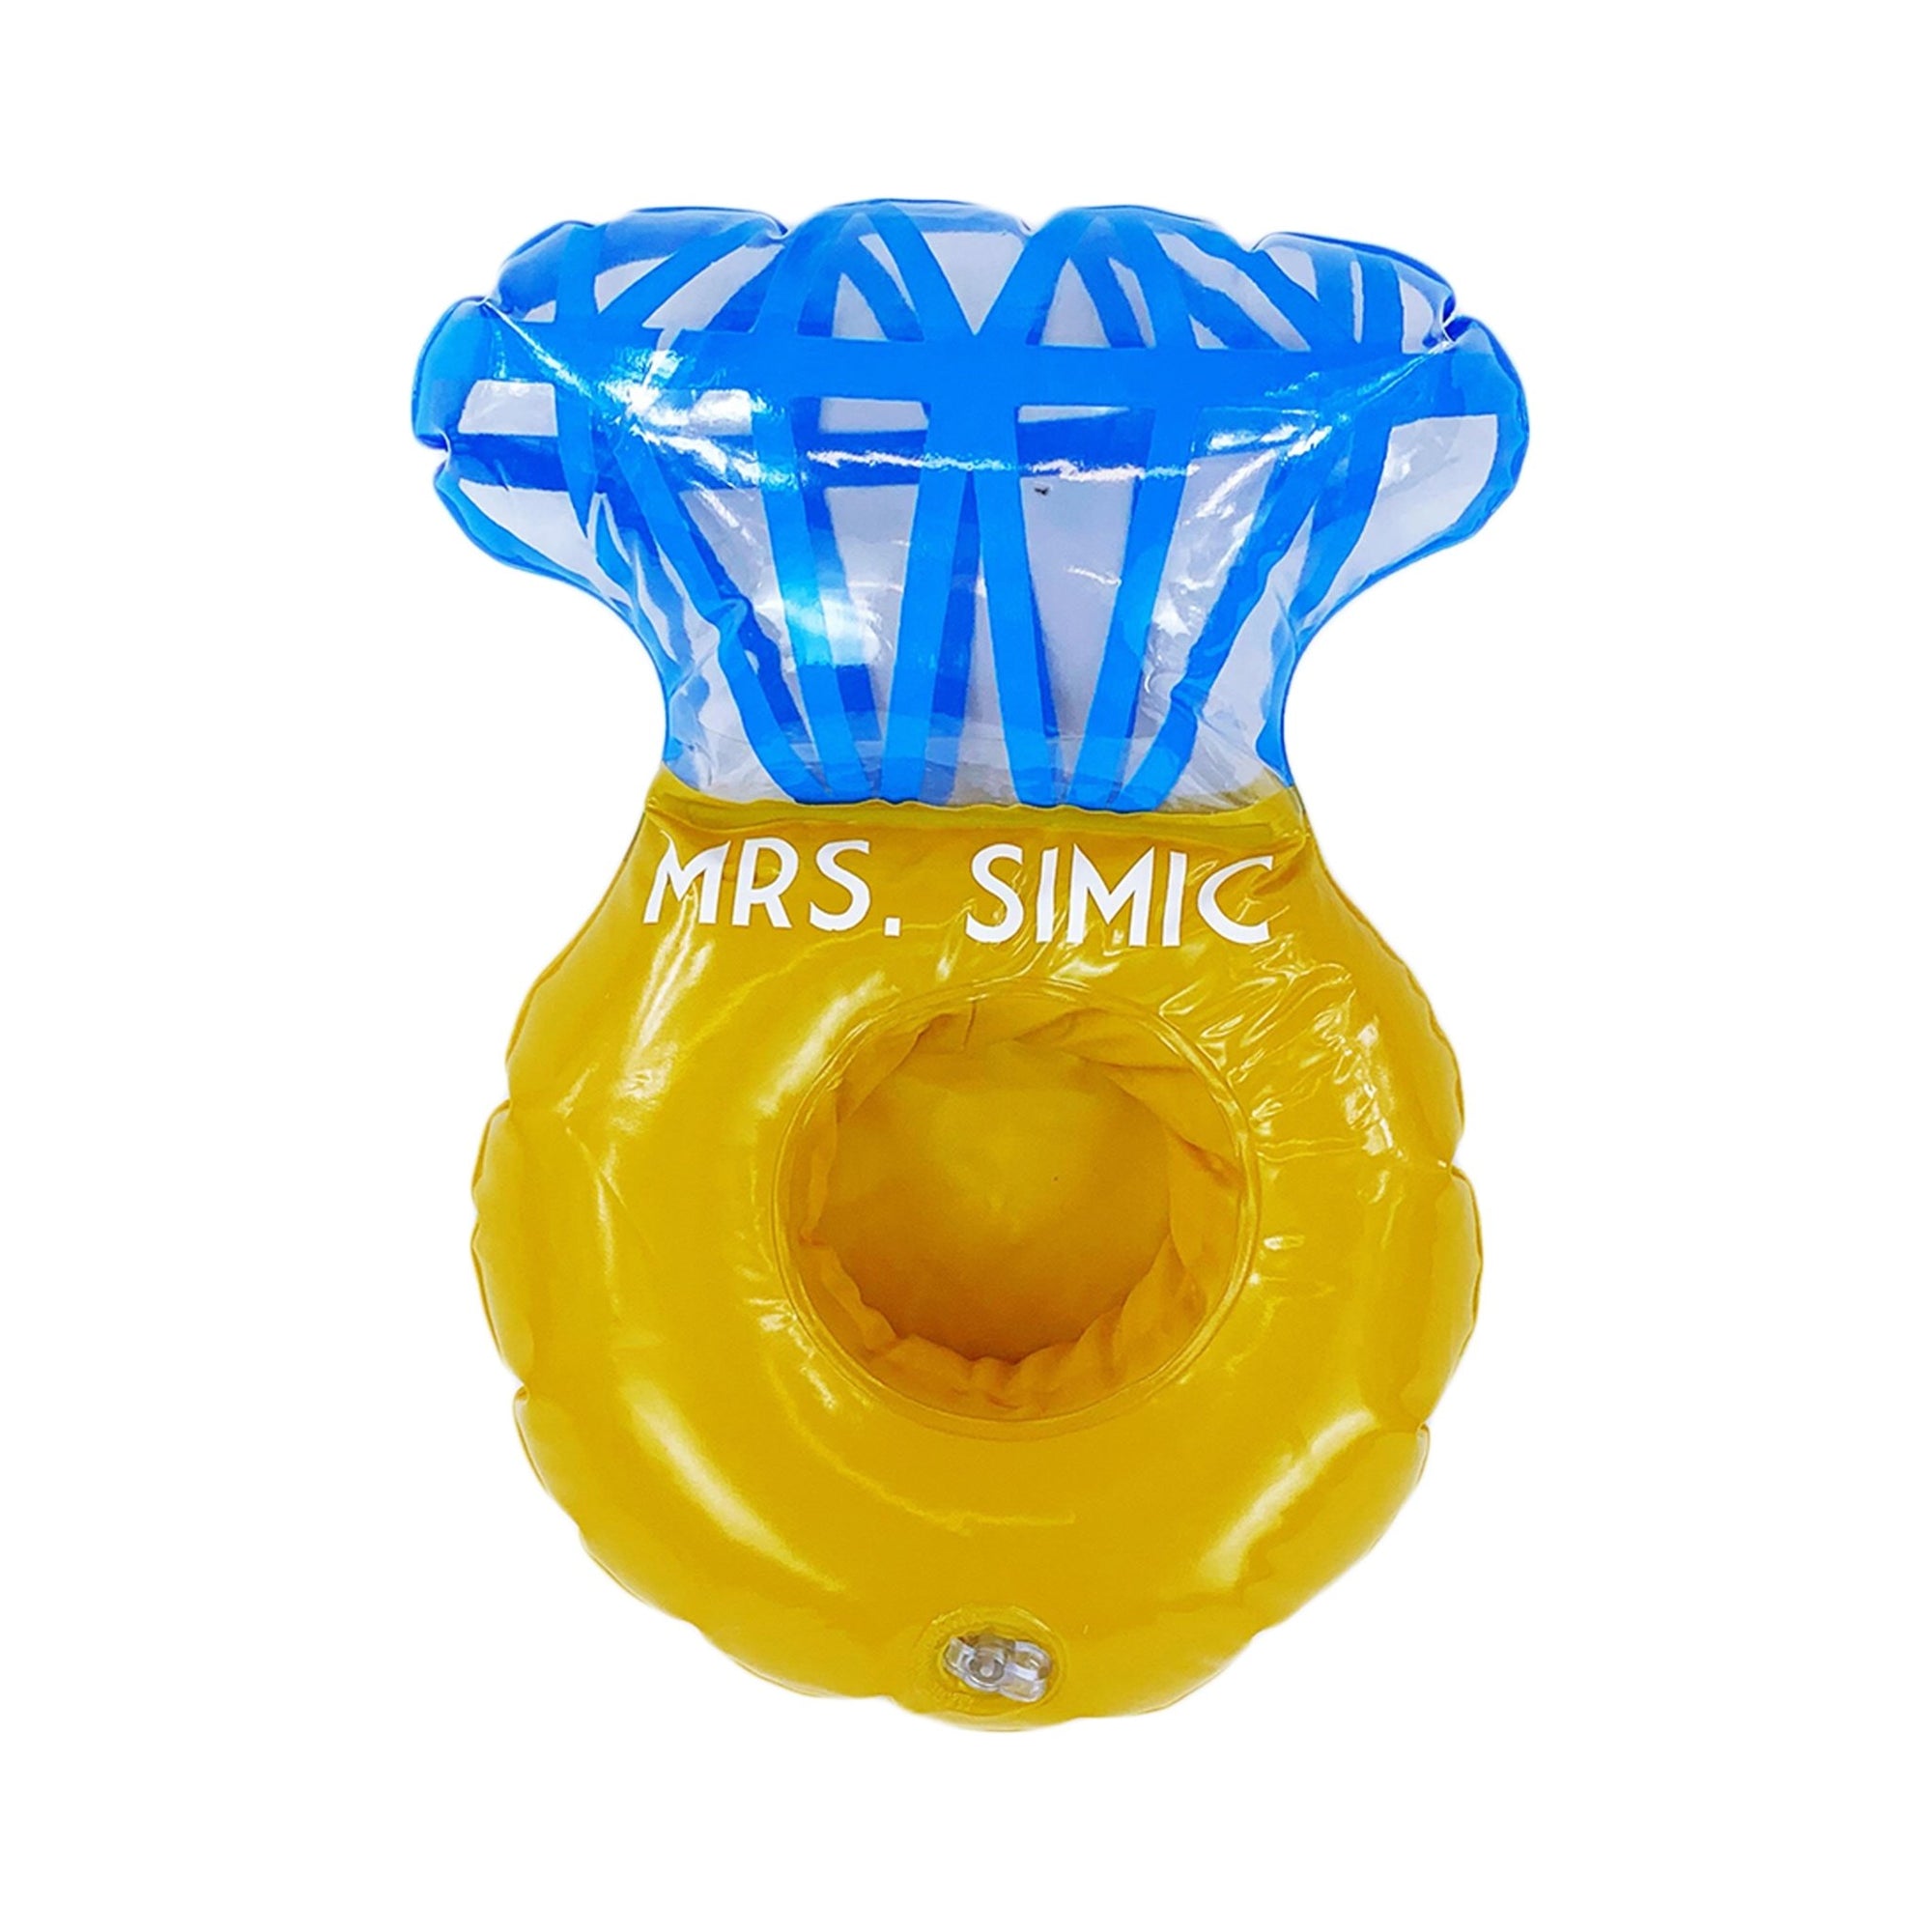 A drink float shaped as a ring is customized with "Mrs. Simic" in white font.